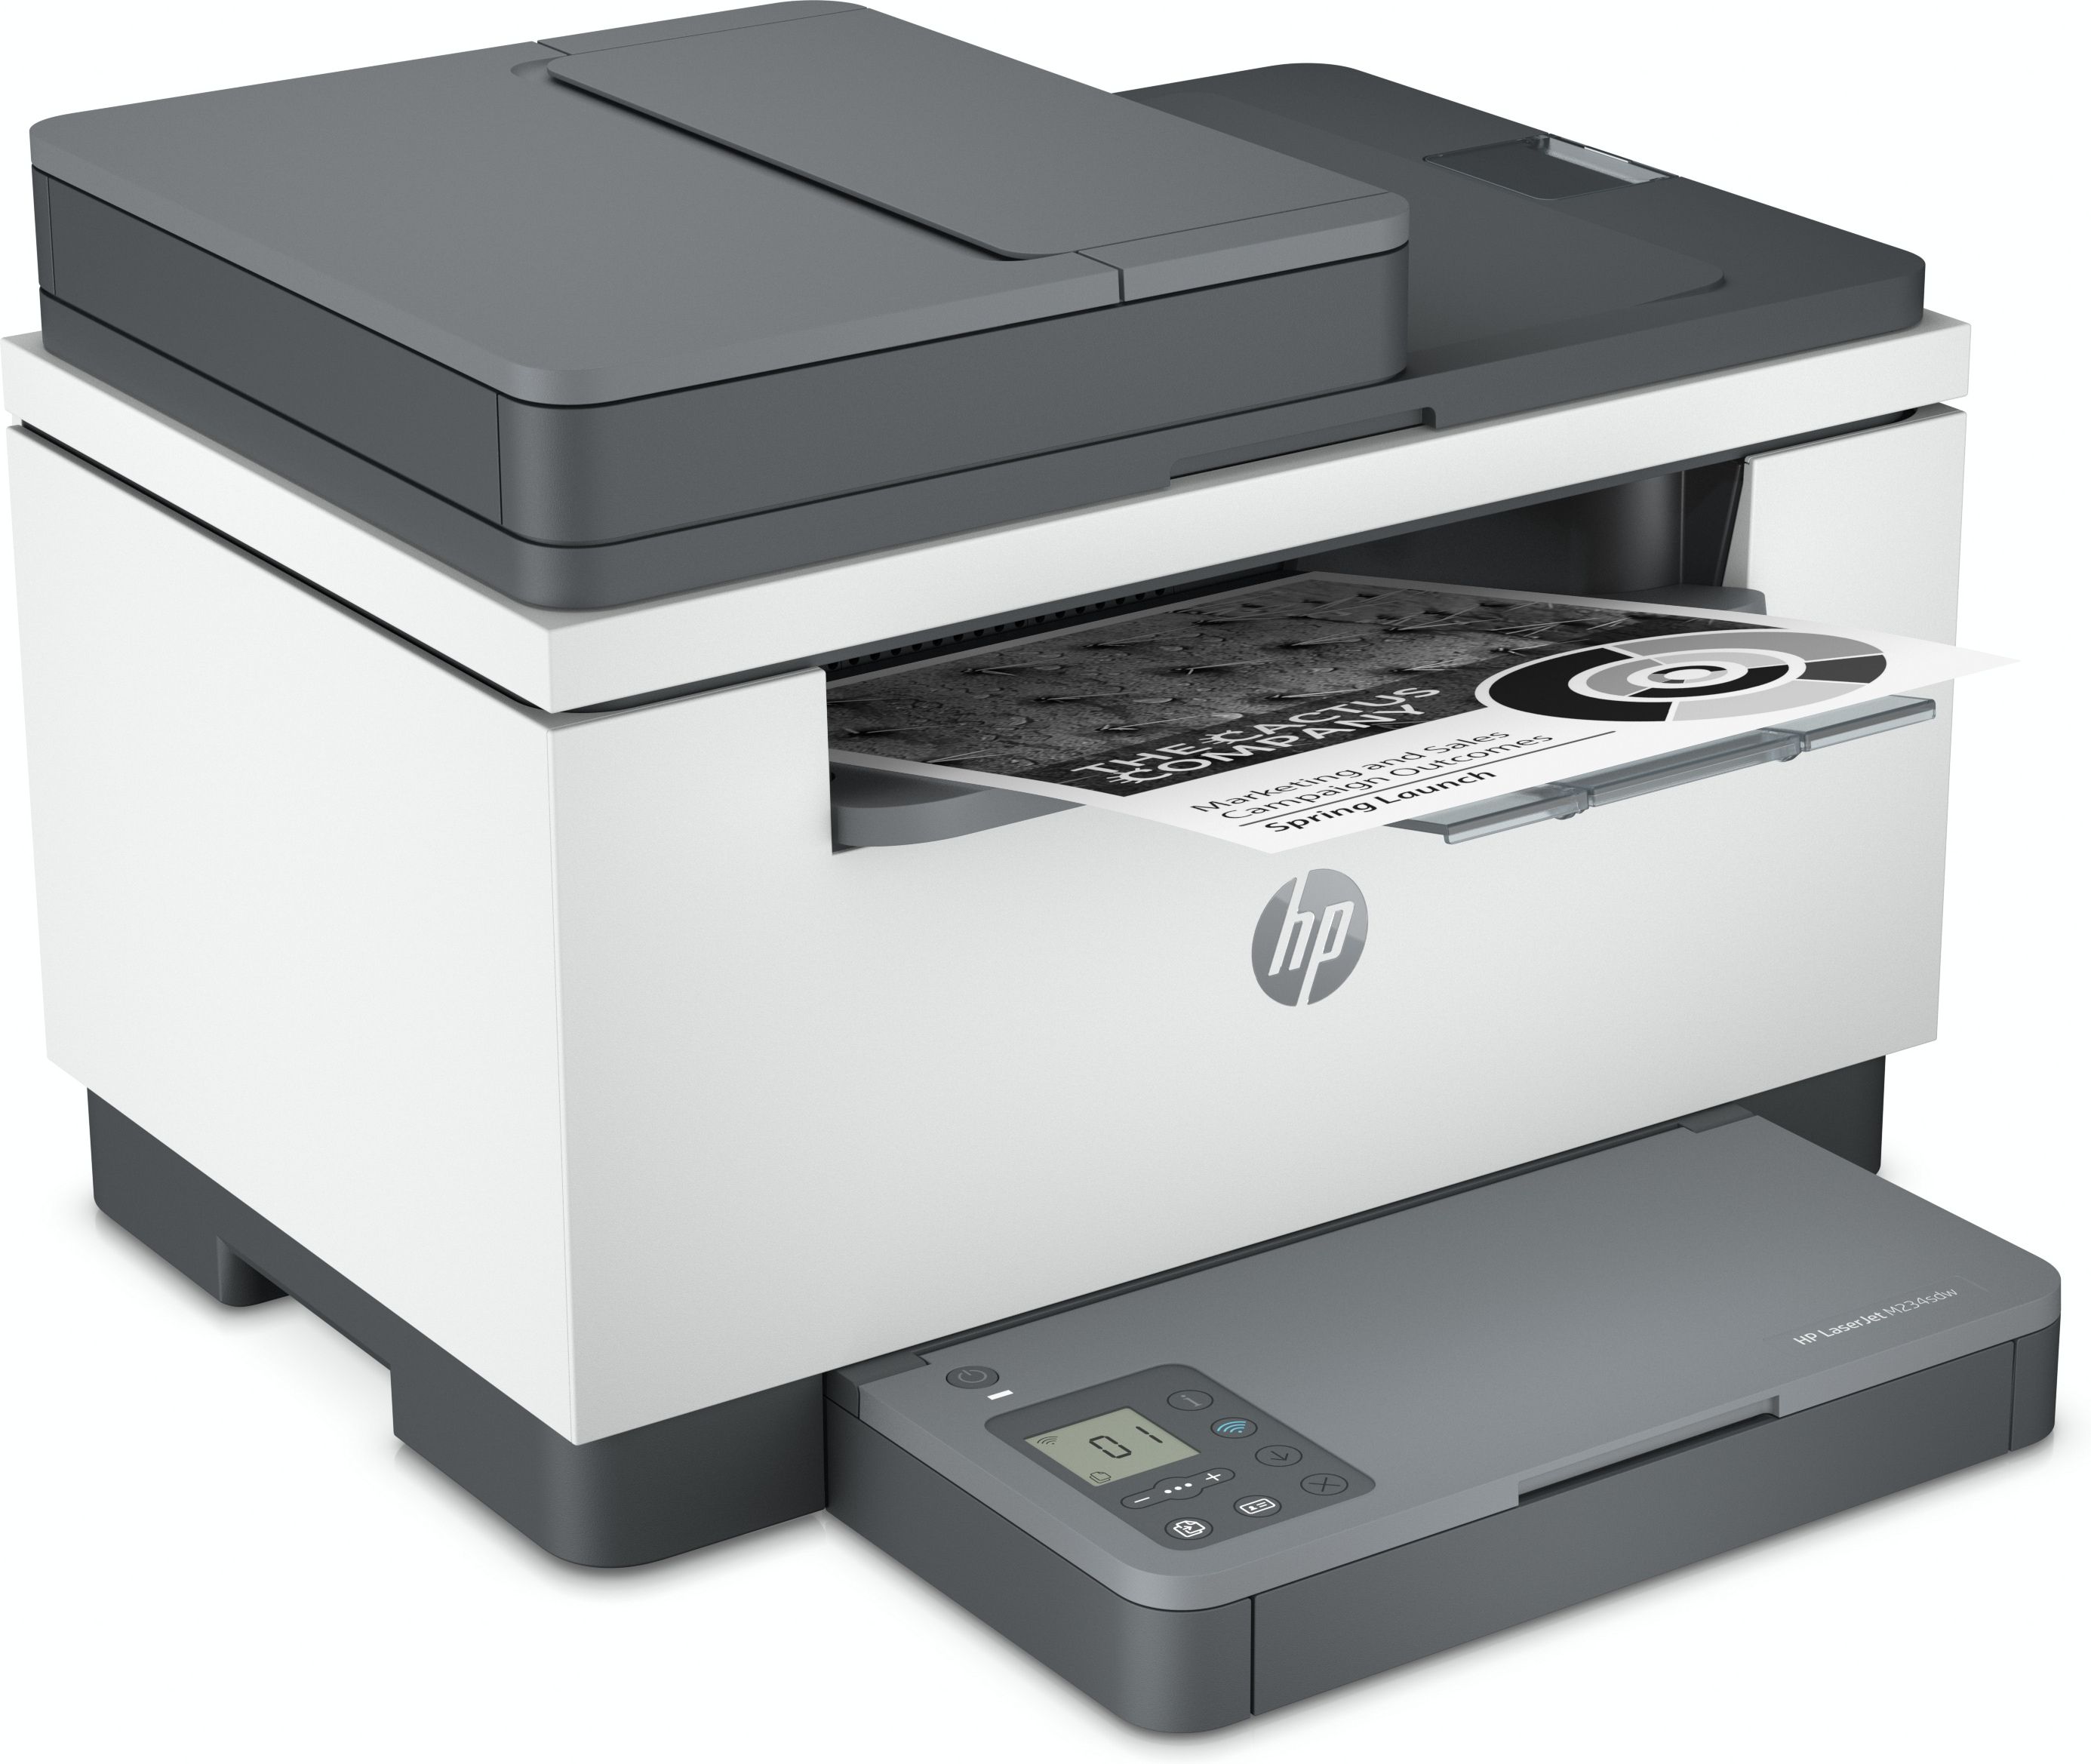 HP LaserJet MFP M234sdw Printer, Black and white, Printer for Small office, Print, copy, scan, Two-sided printing; Scan to email; Scan to PDF_5